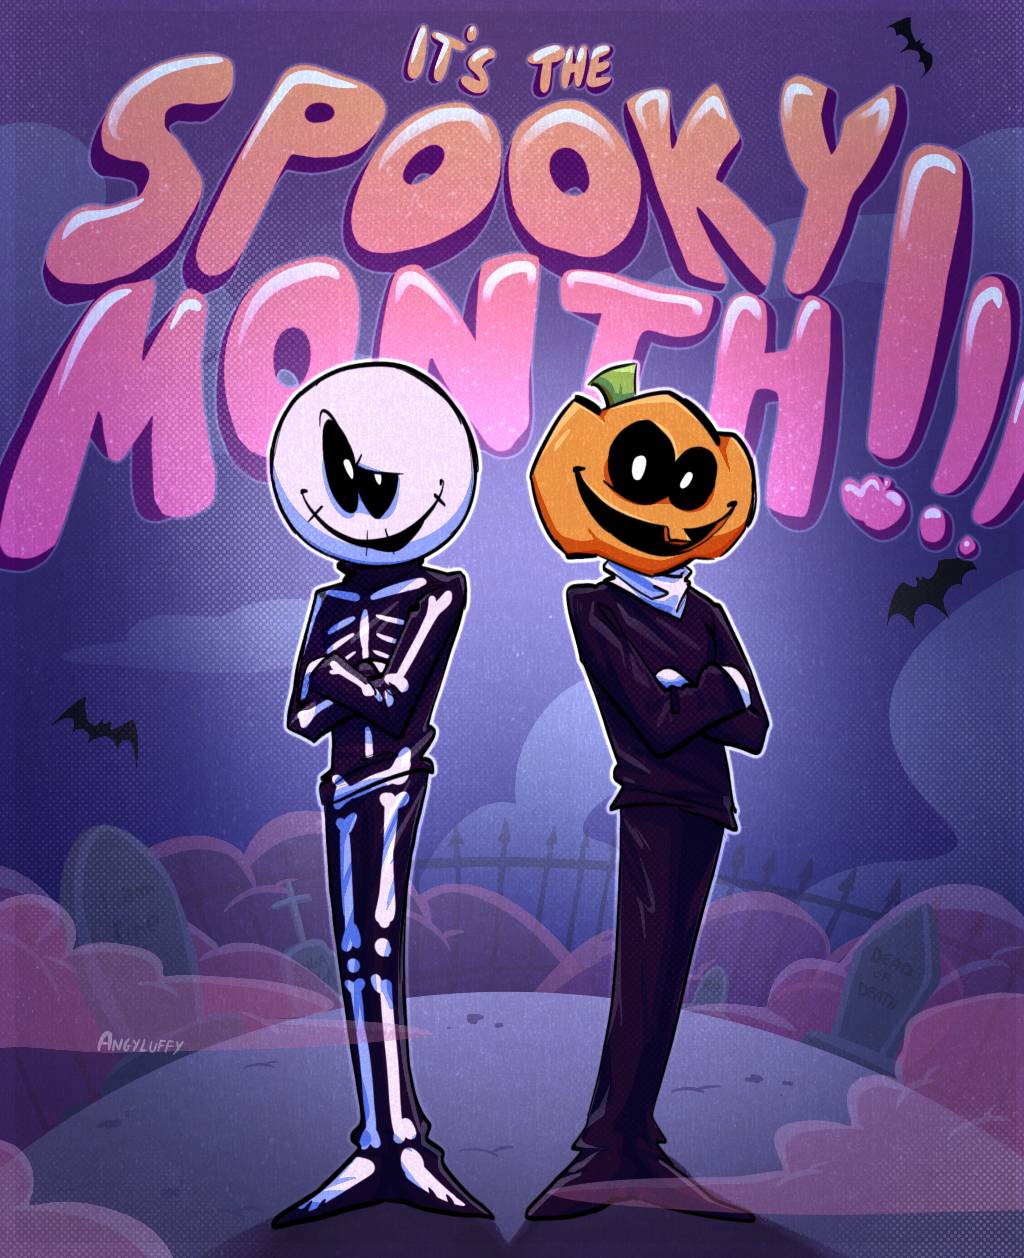 It's the Spooky Month! by TurquoiseTeel on DeviantArt